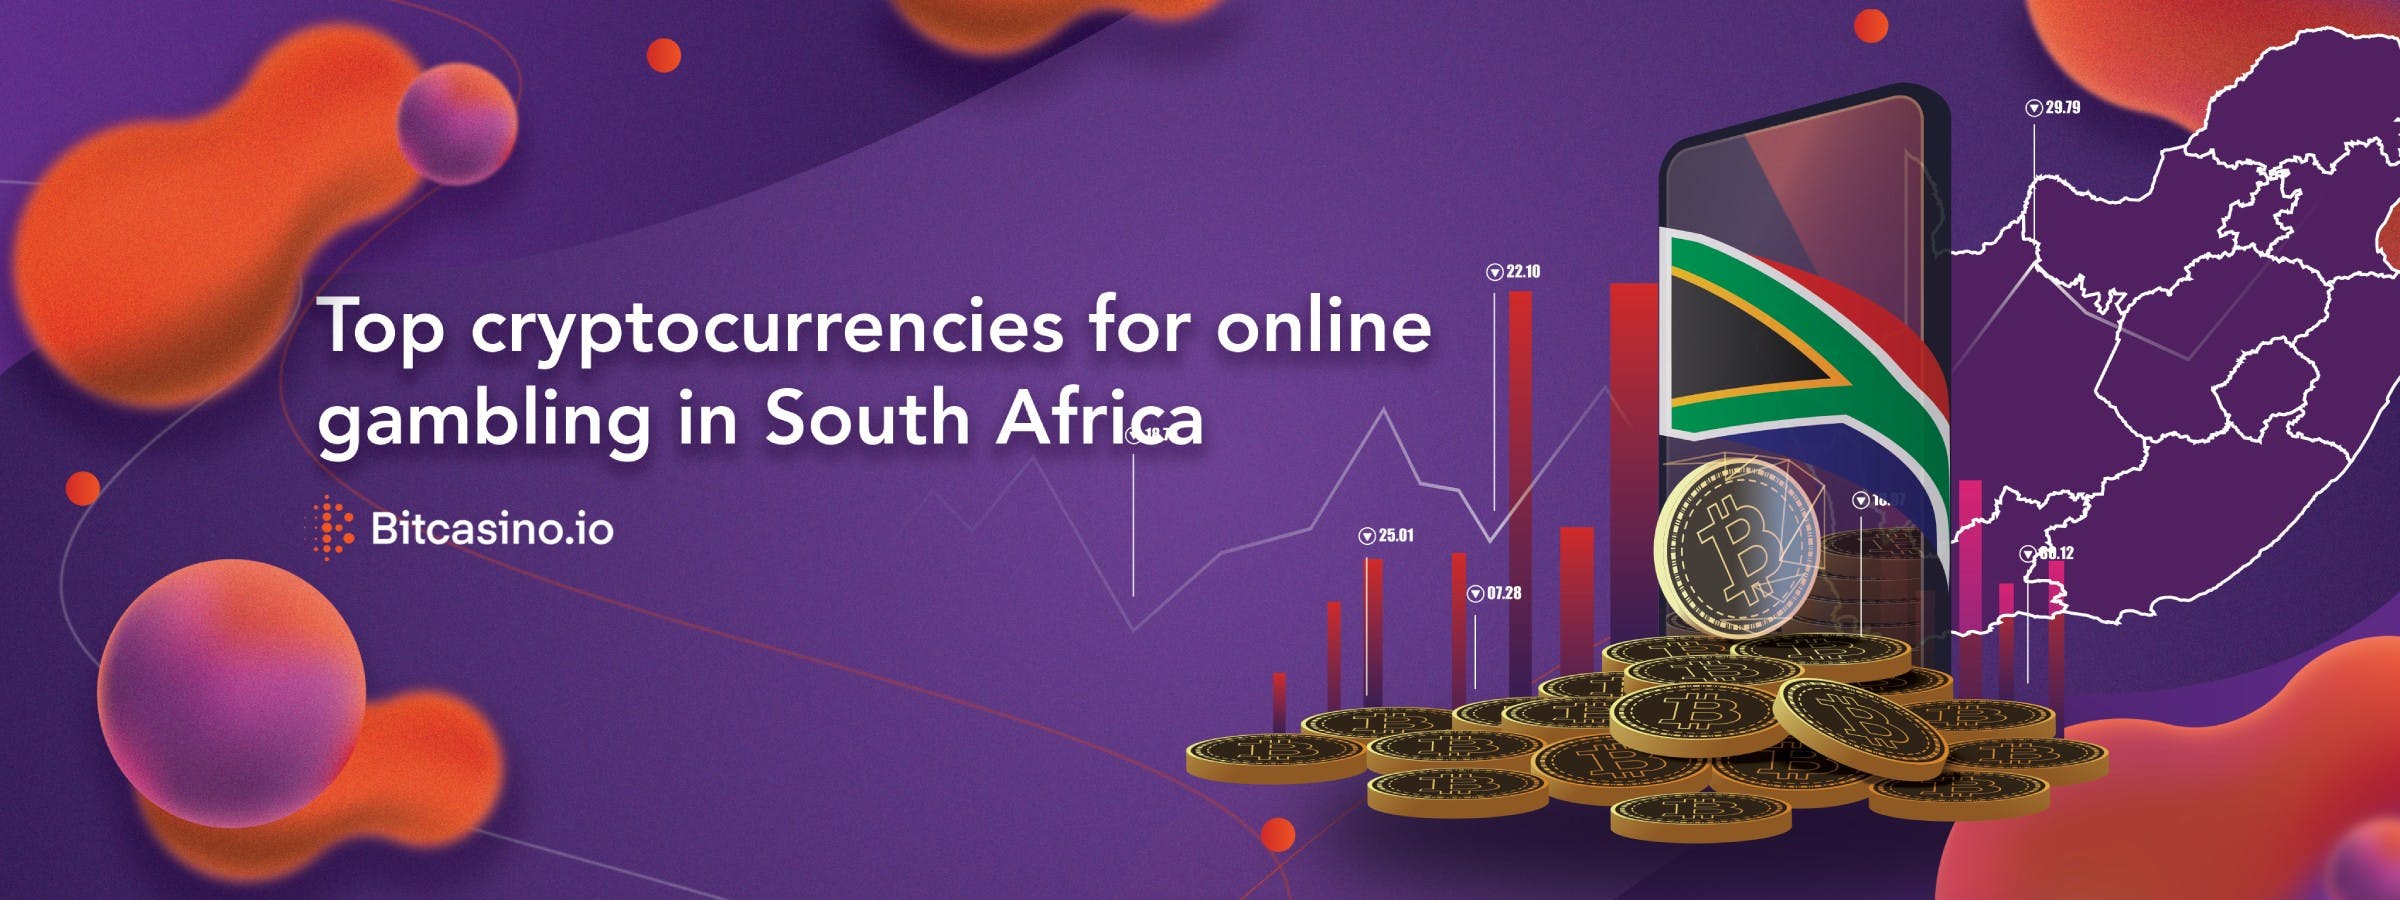 Top 5 cryptocurrencies for online gambling in South Africa